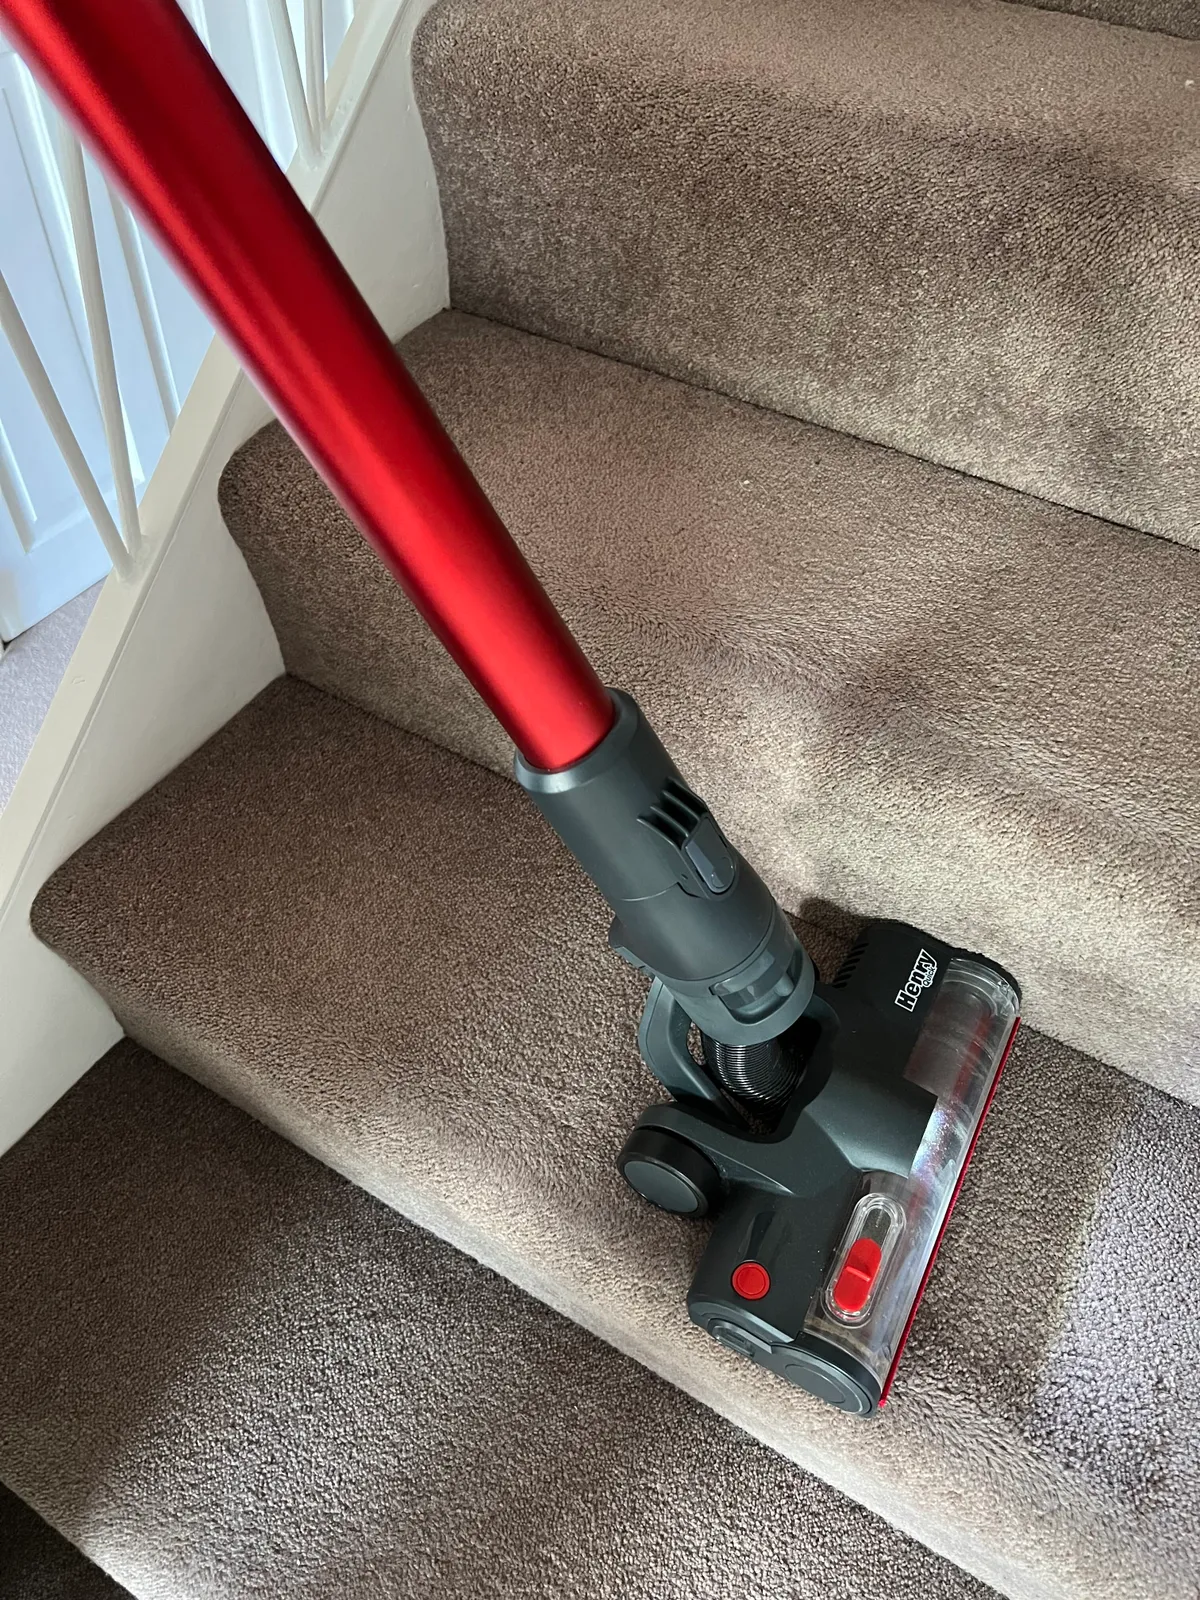 Henry Quick vacuum cleaner on stair